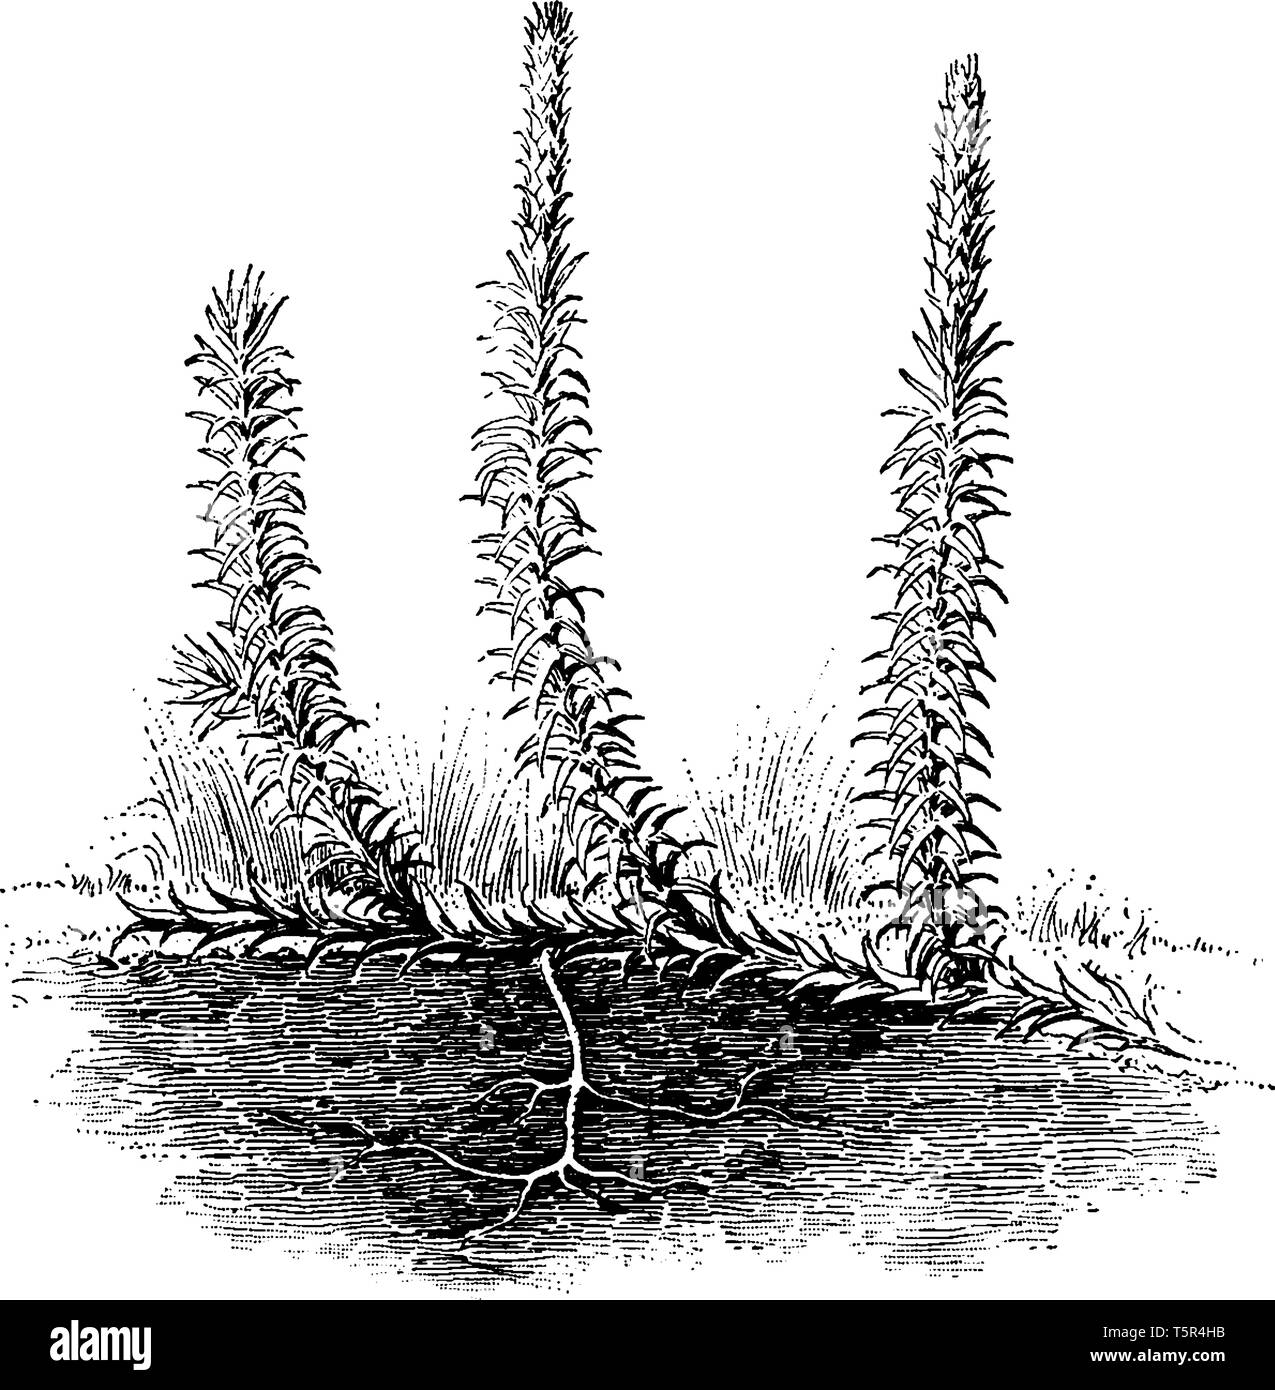 Club Moss Black And White Stock Photos Images Alamy